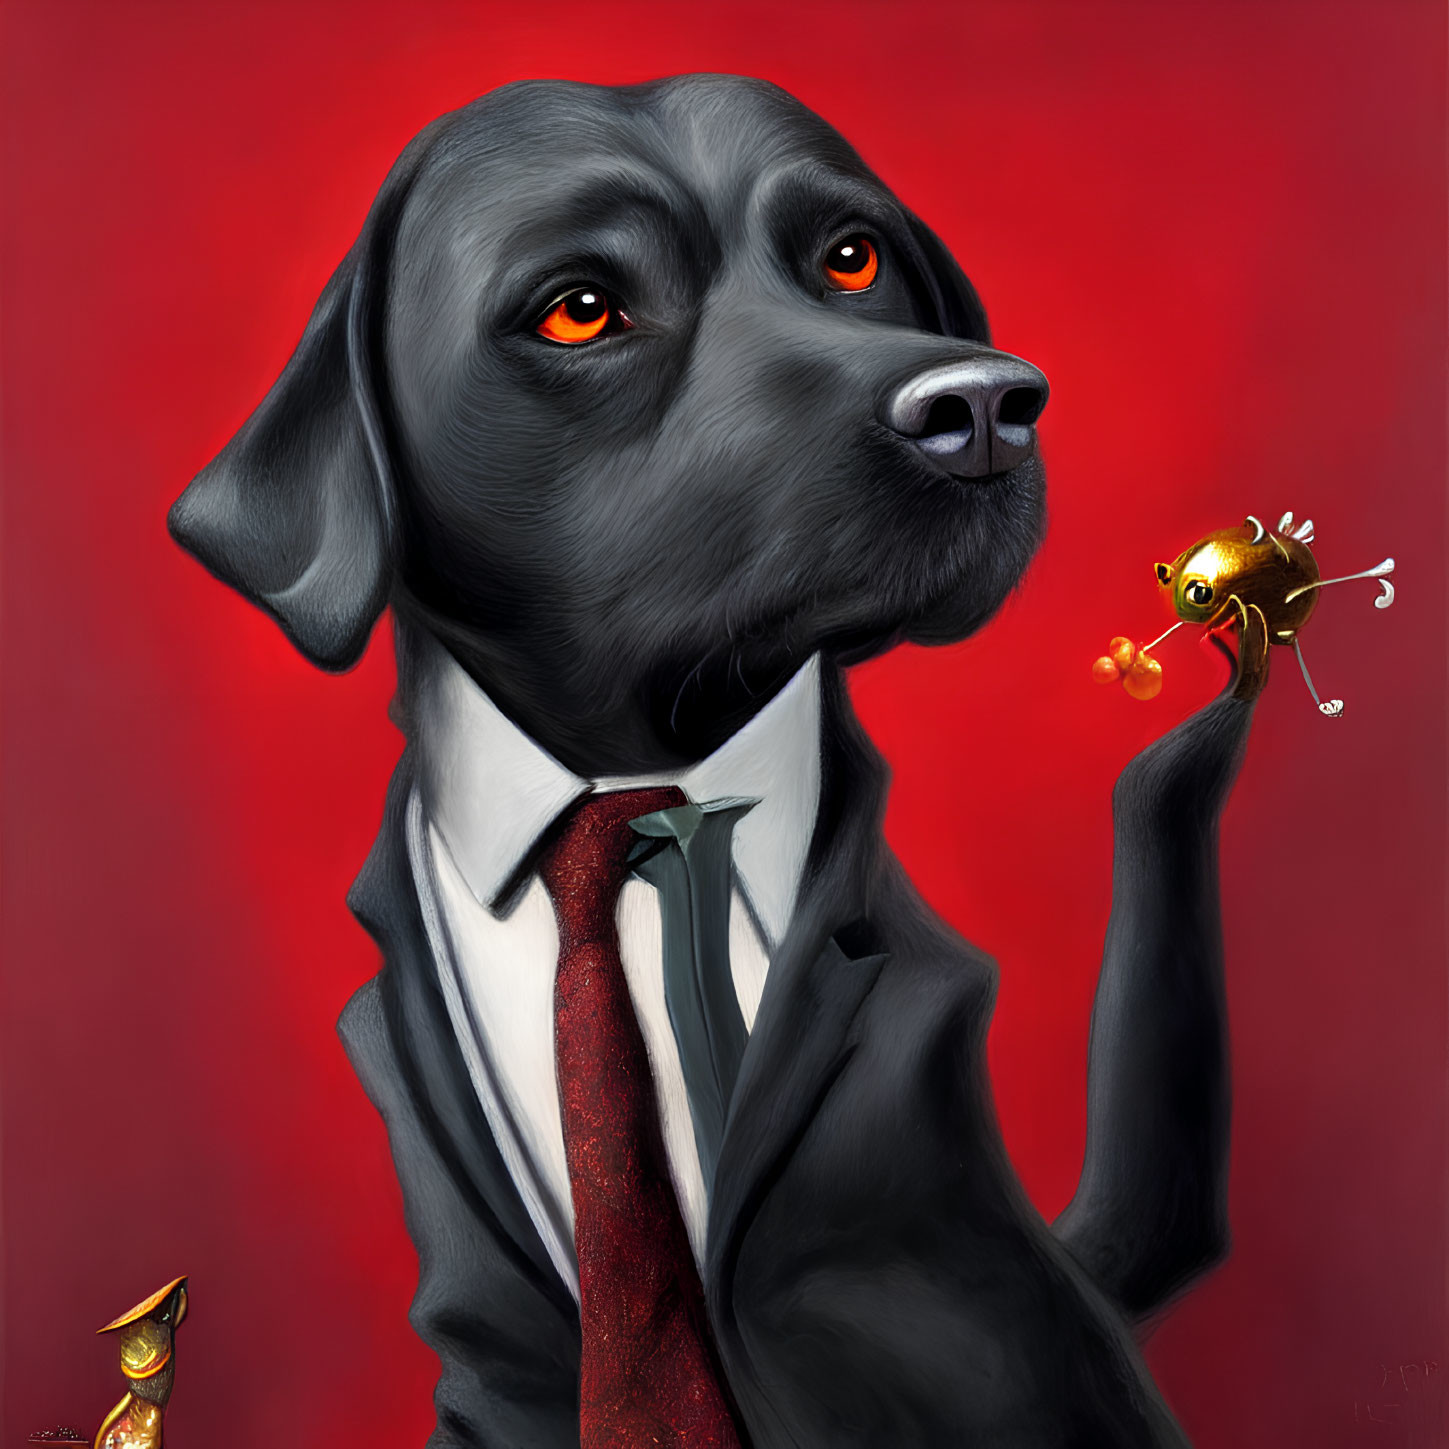 Stylized painting of black dog in suit with red tie holding goldfish on paw